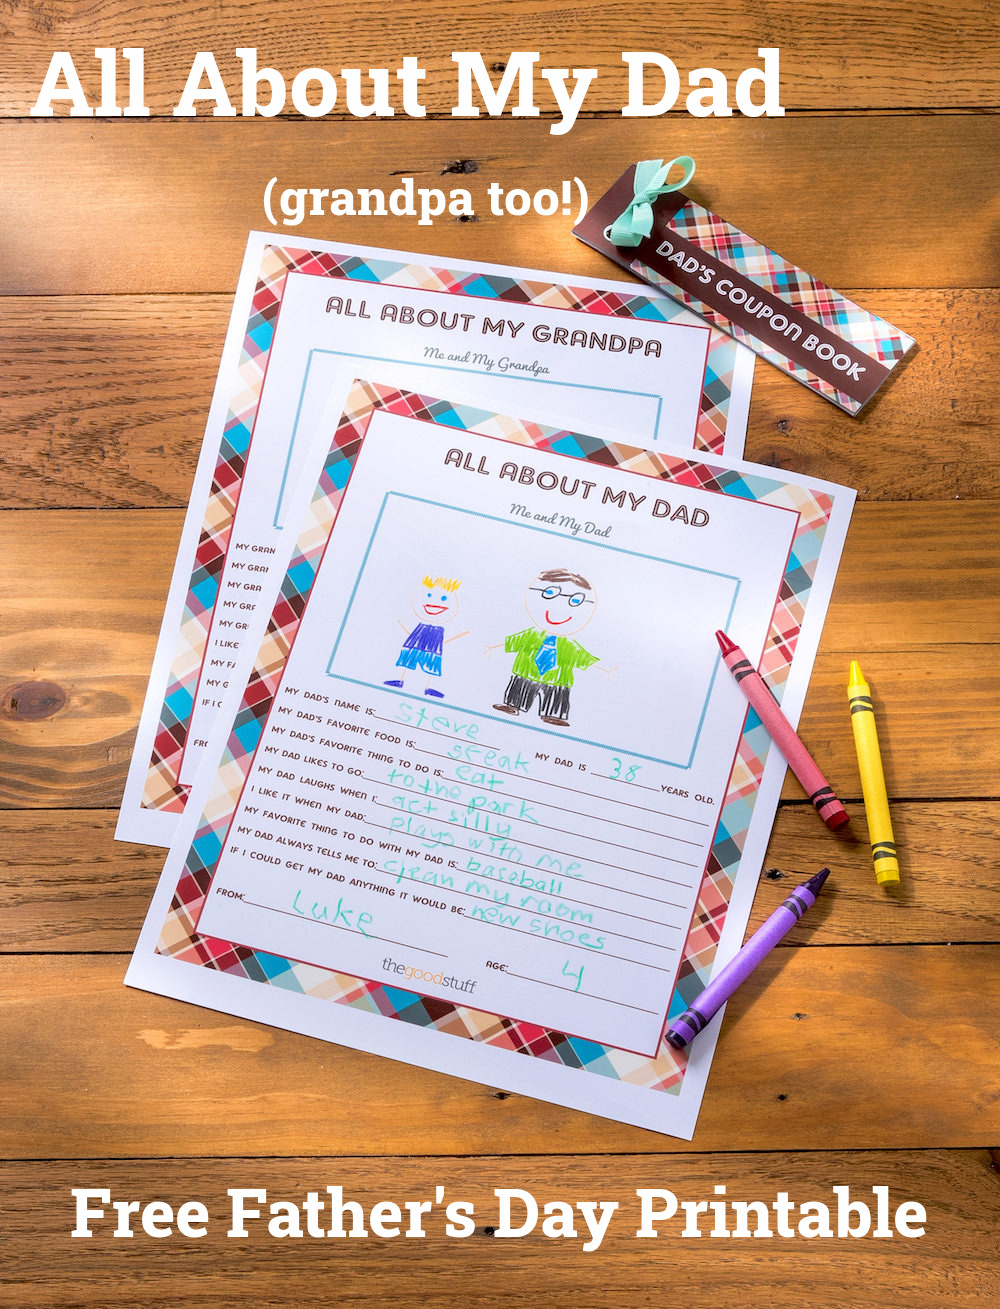 All About My Dad Printable Sheet Grandpa Too Diy Candy SexiezPicz Web 